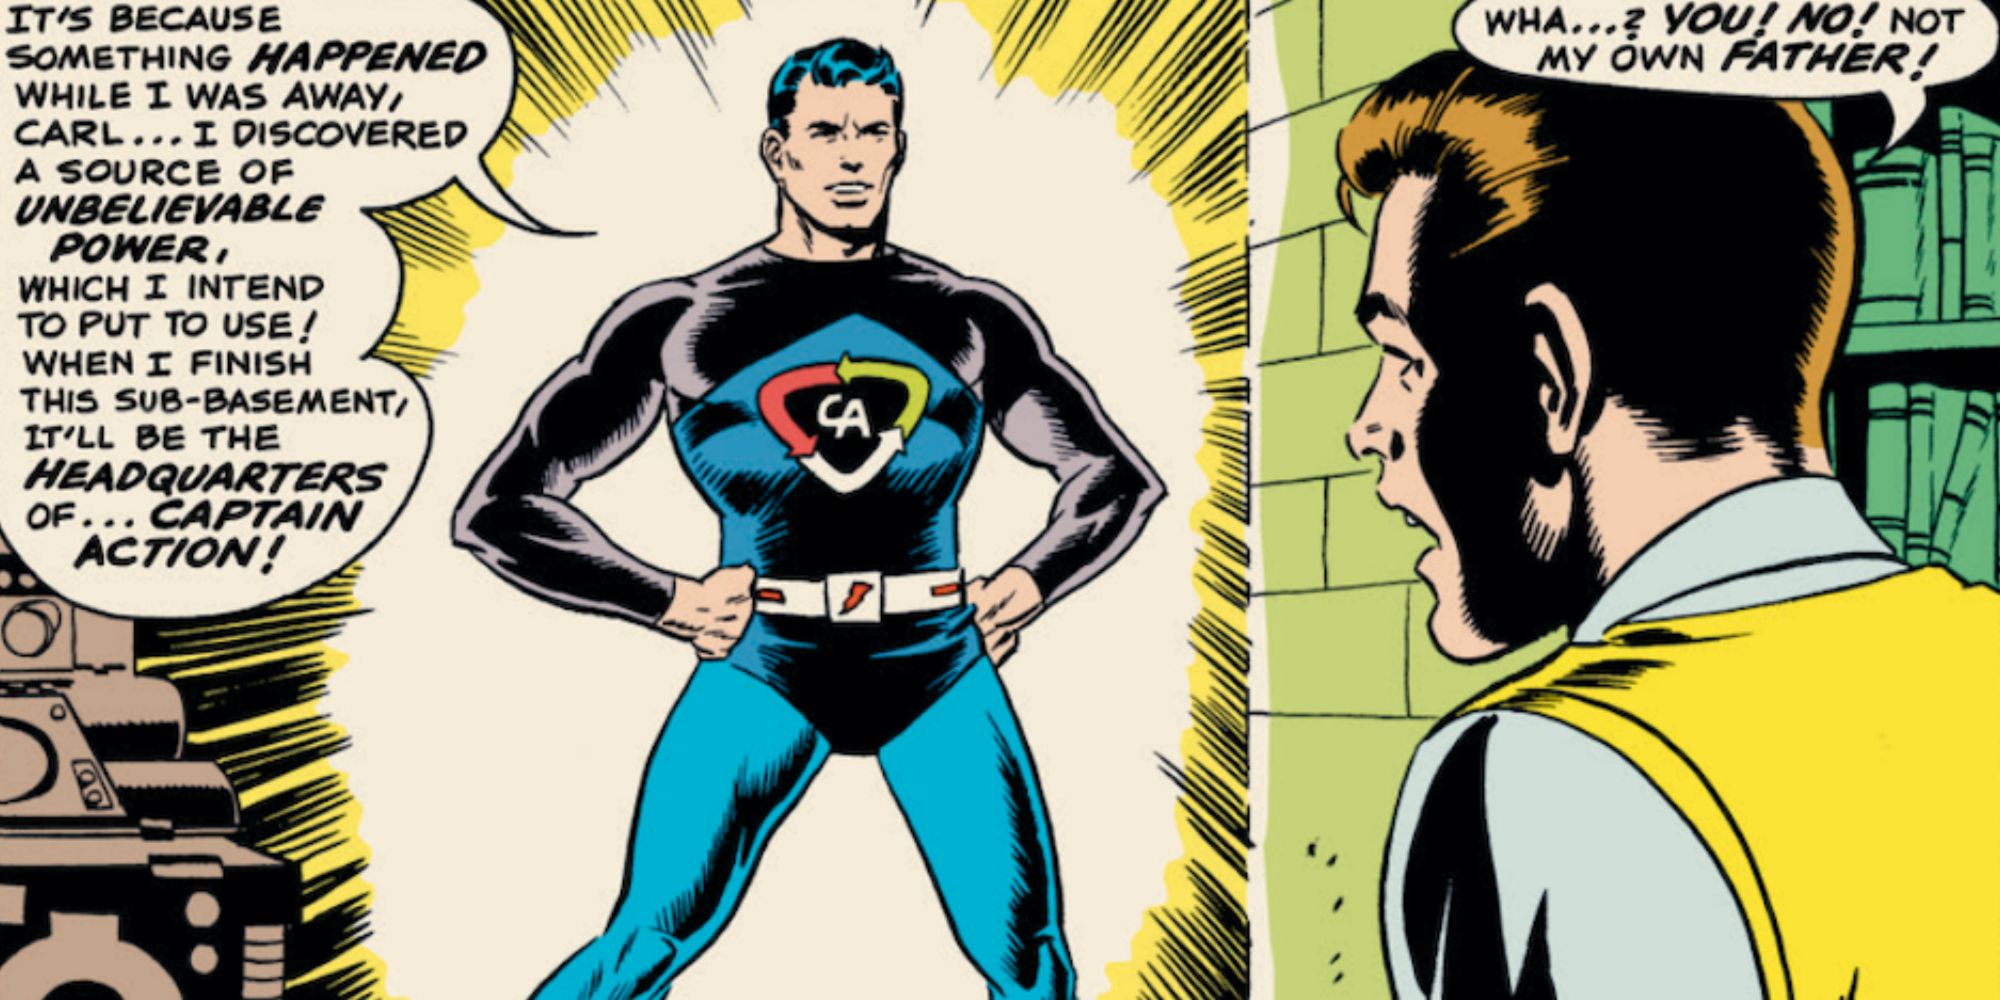 Captain Action appears in DC Comics.